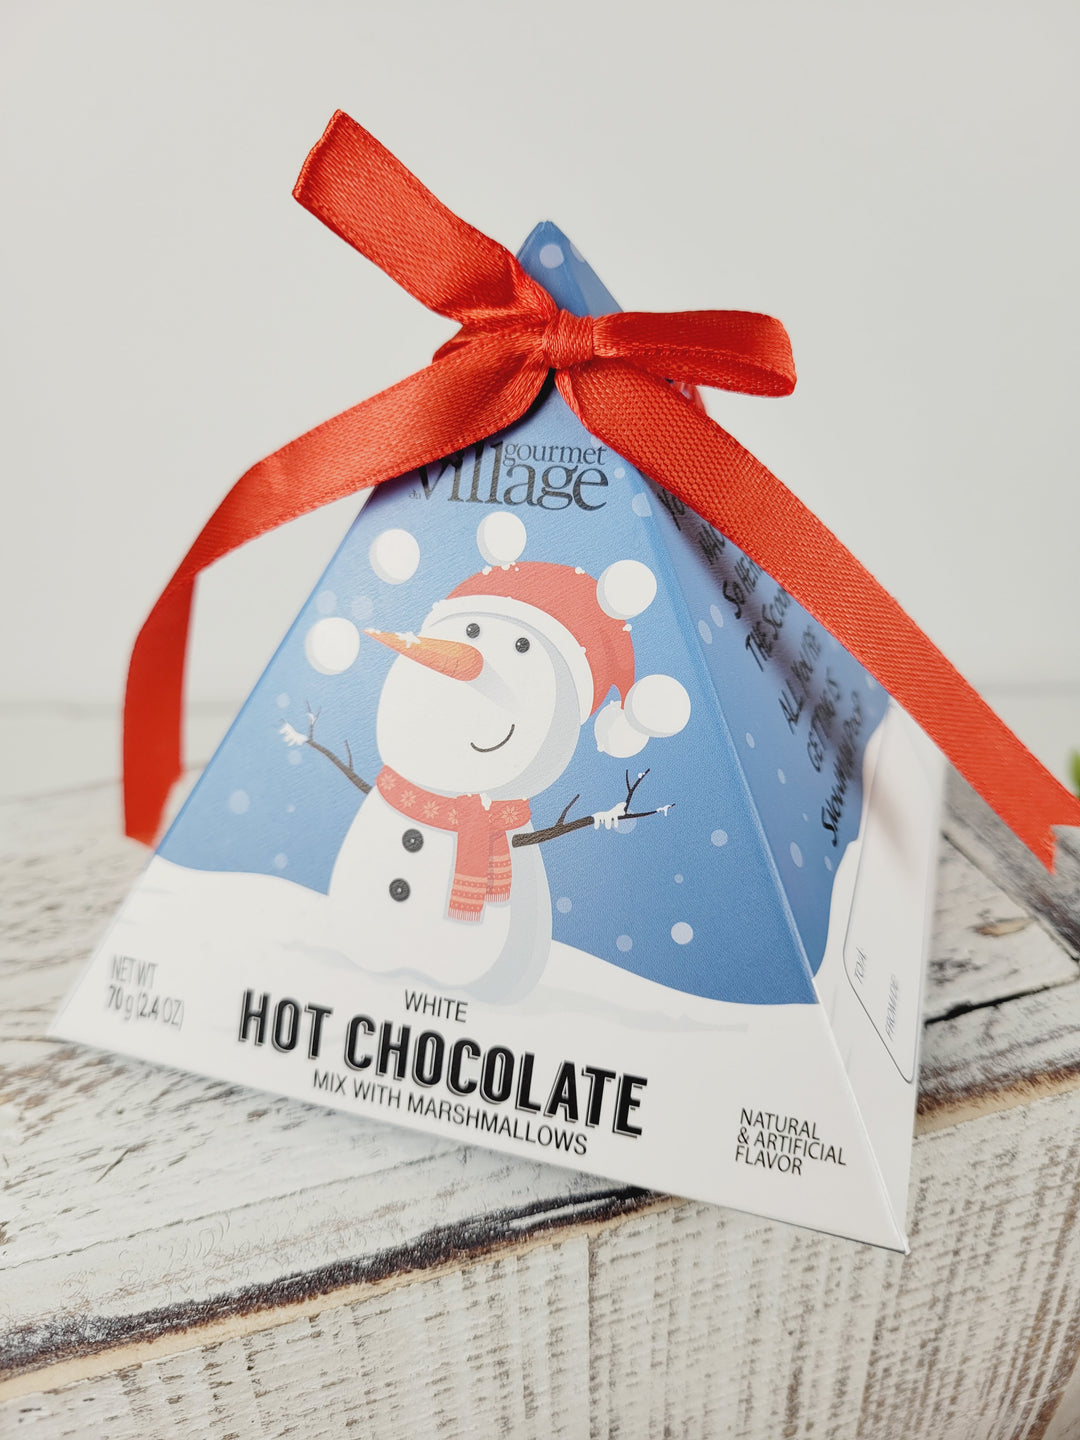 Lindsay's Creations, Gourmet Village Hot Chocolate Gift Ornaments